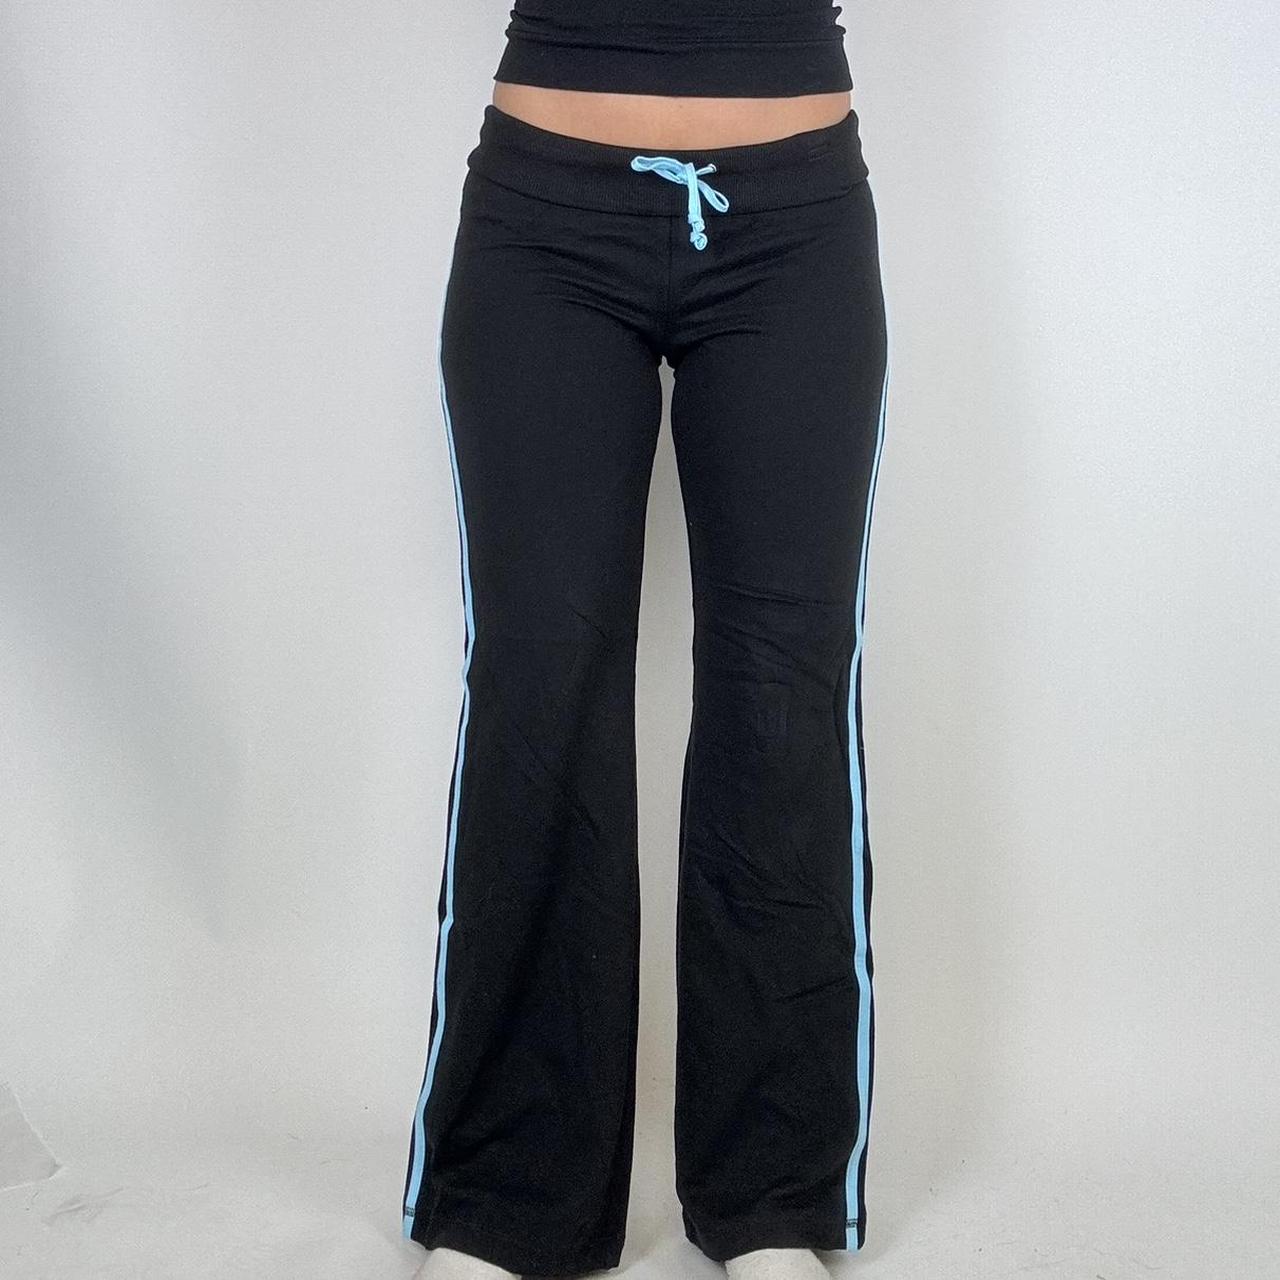  Women's Fold Over Flare Yoga Pants Y2k Low Rise Bell